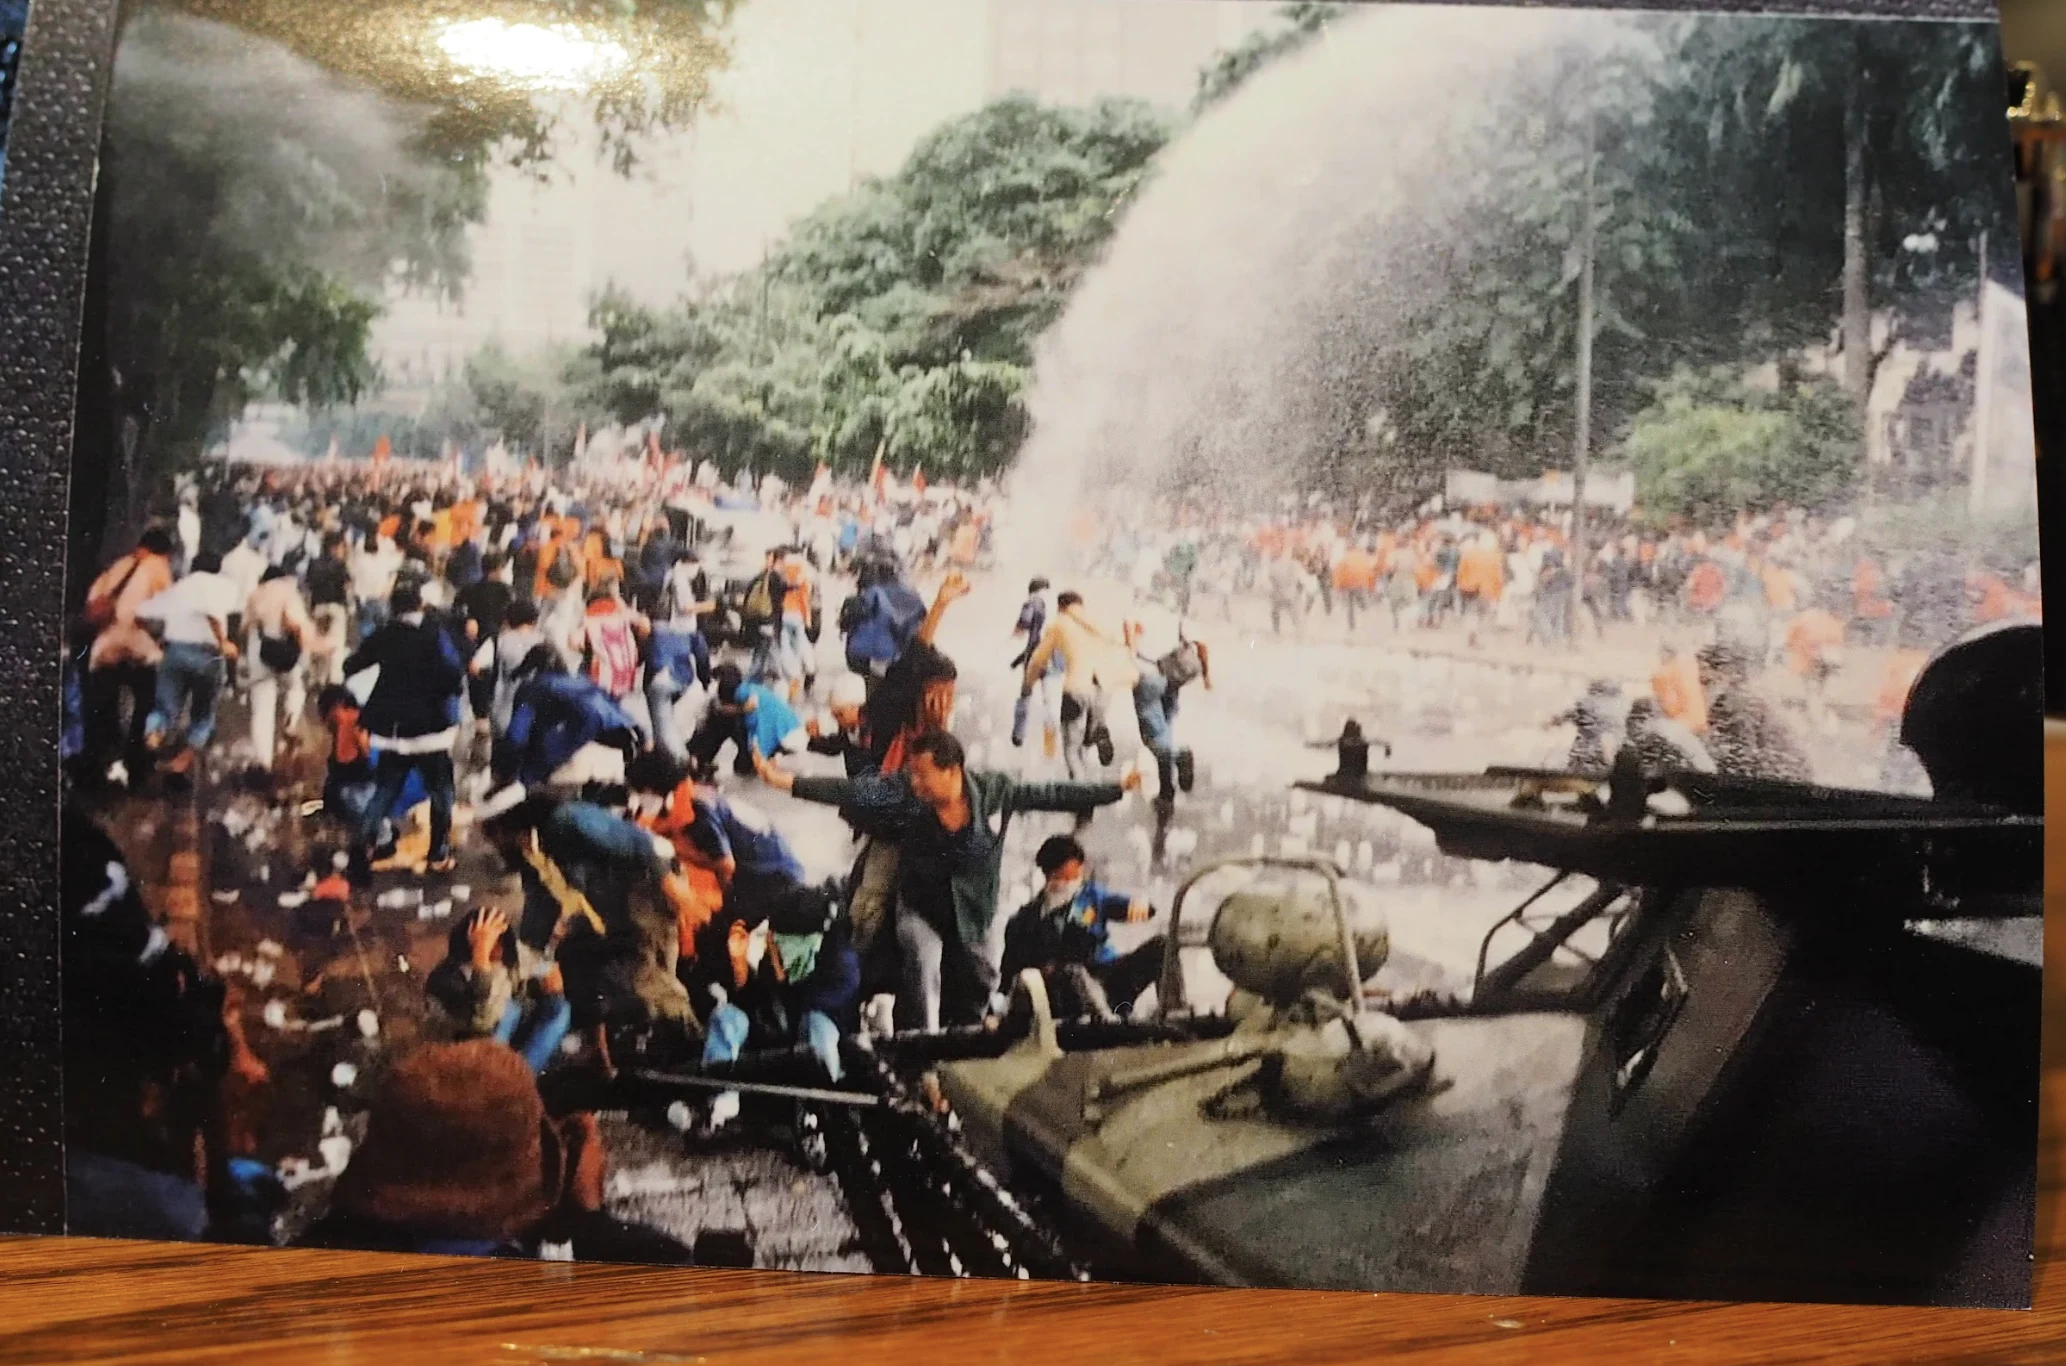 Catharine McKenna/Submitted: Indonesia 1998 coup